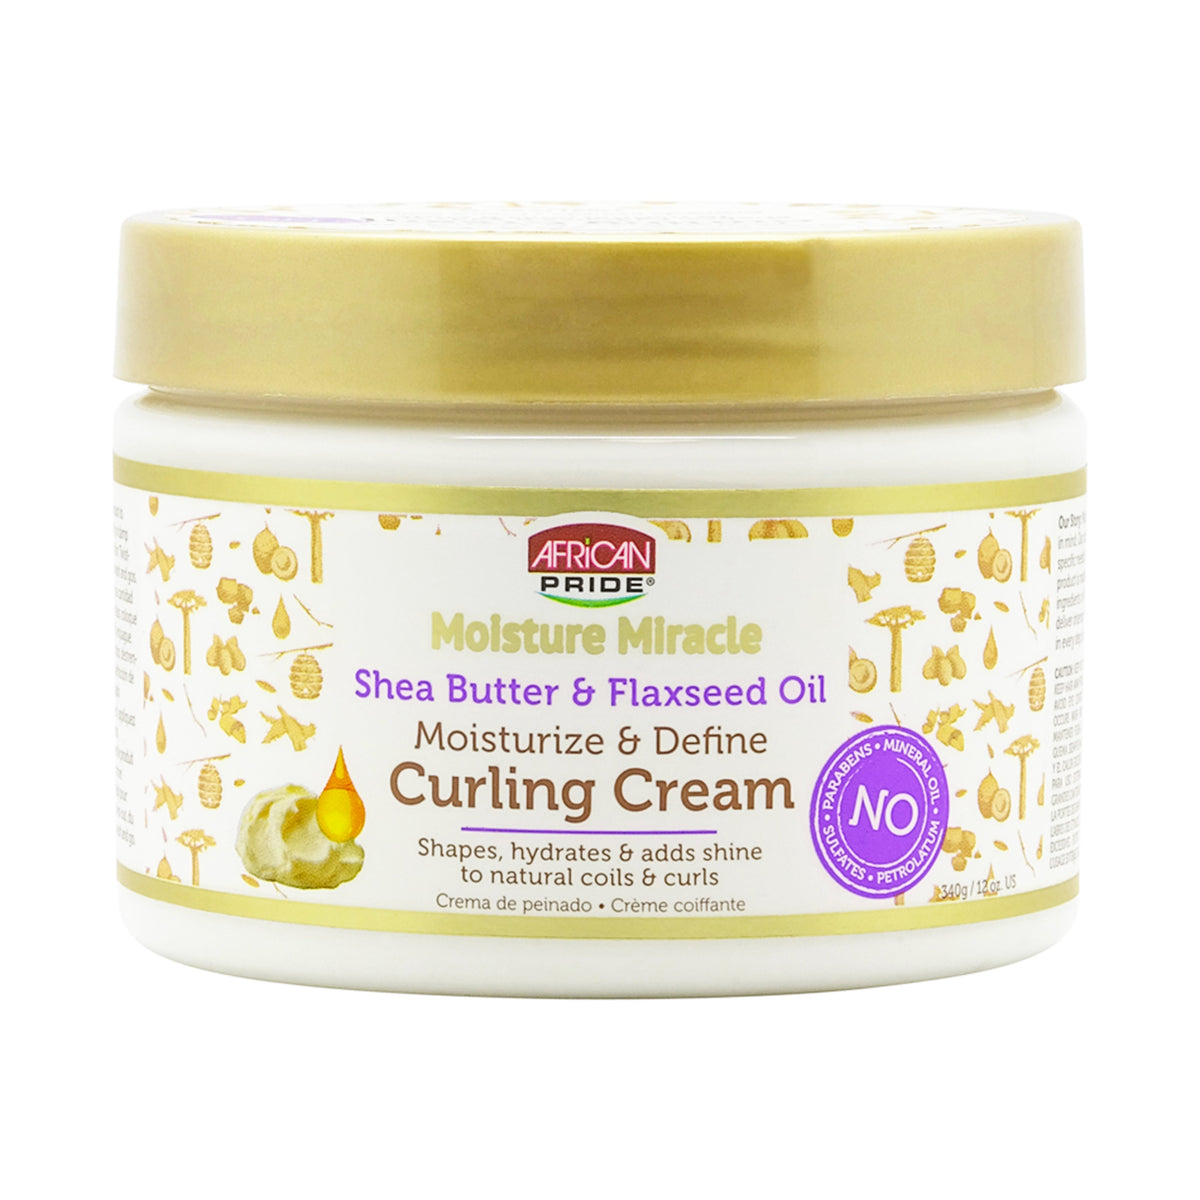 African Pride Shea Butter & Flaxseed Oil Curling Cream 340 g- AQ Online